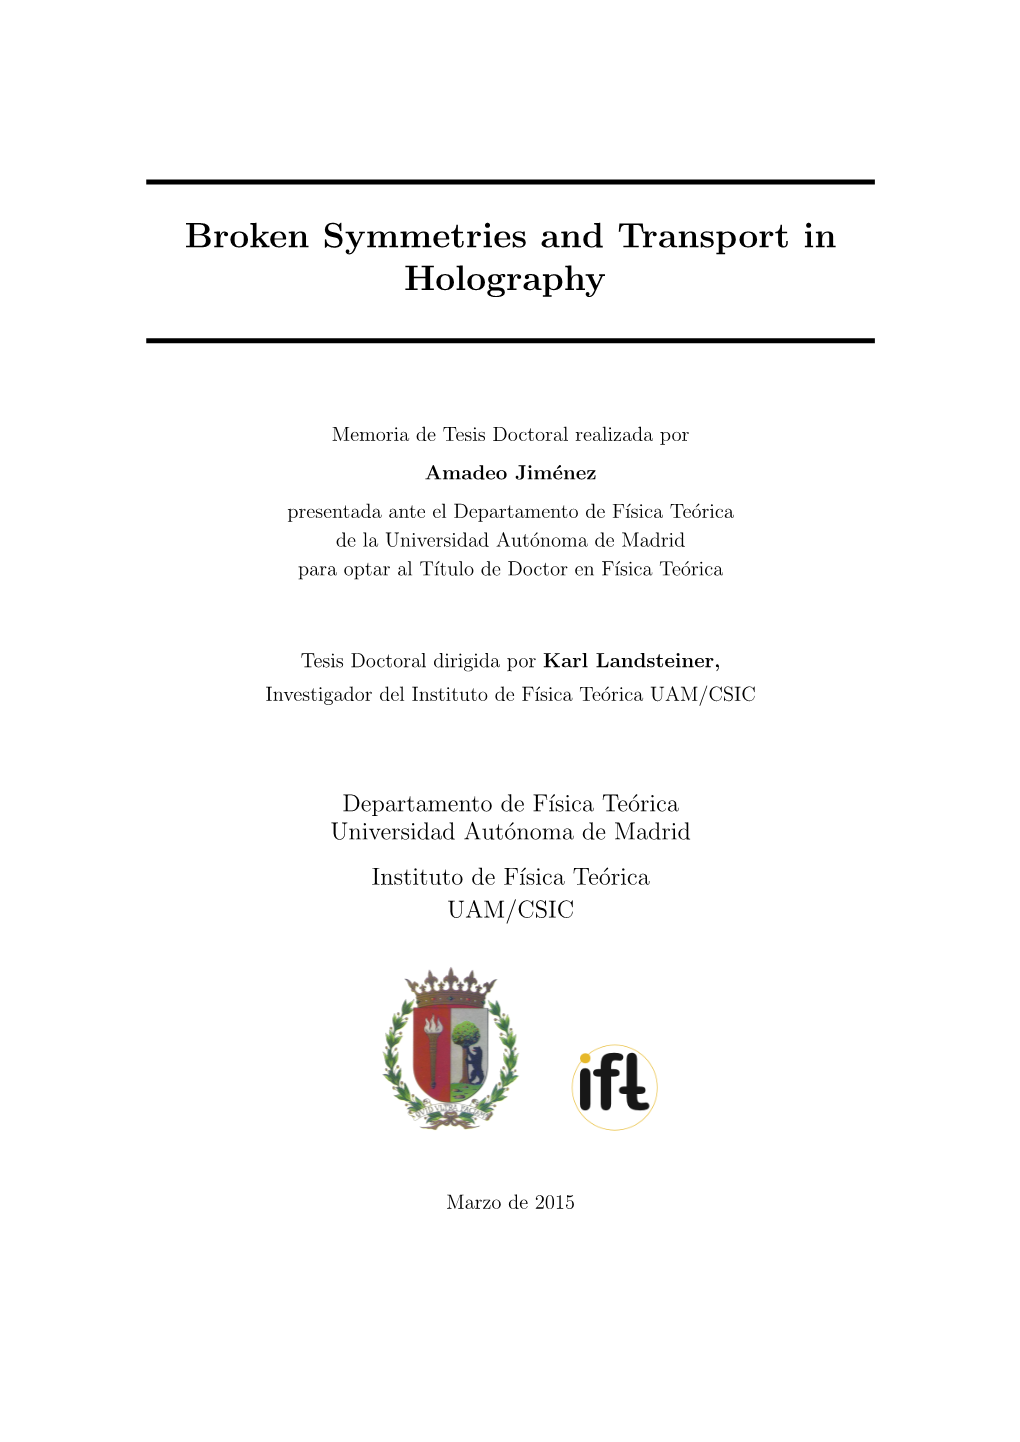 Broken Symmetries and Transport in Holography